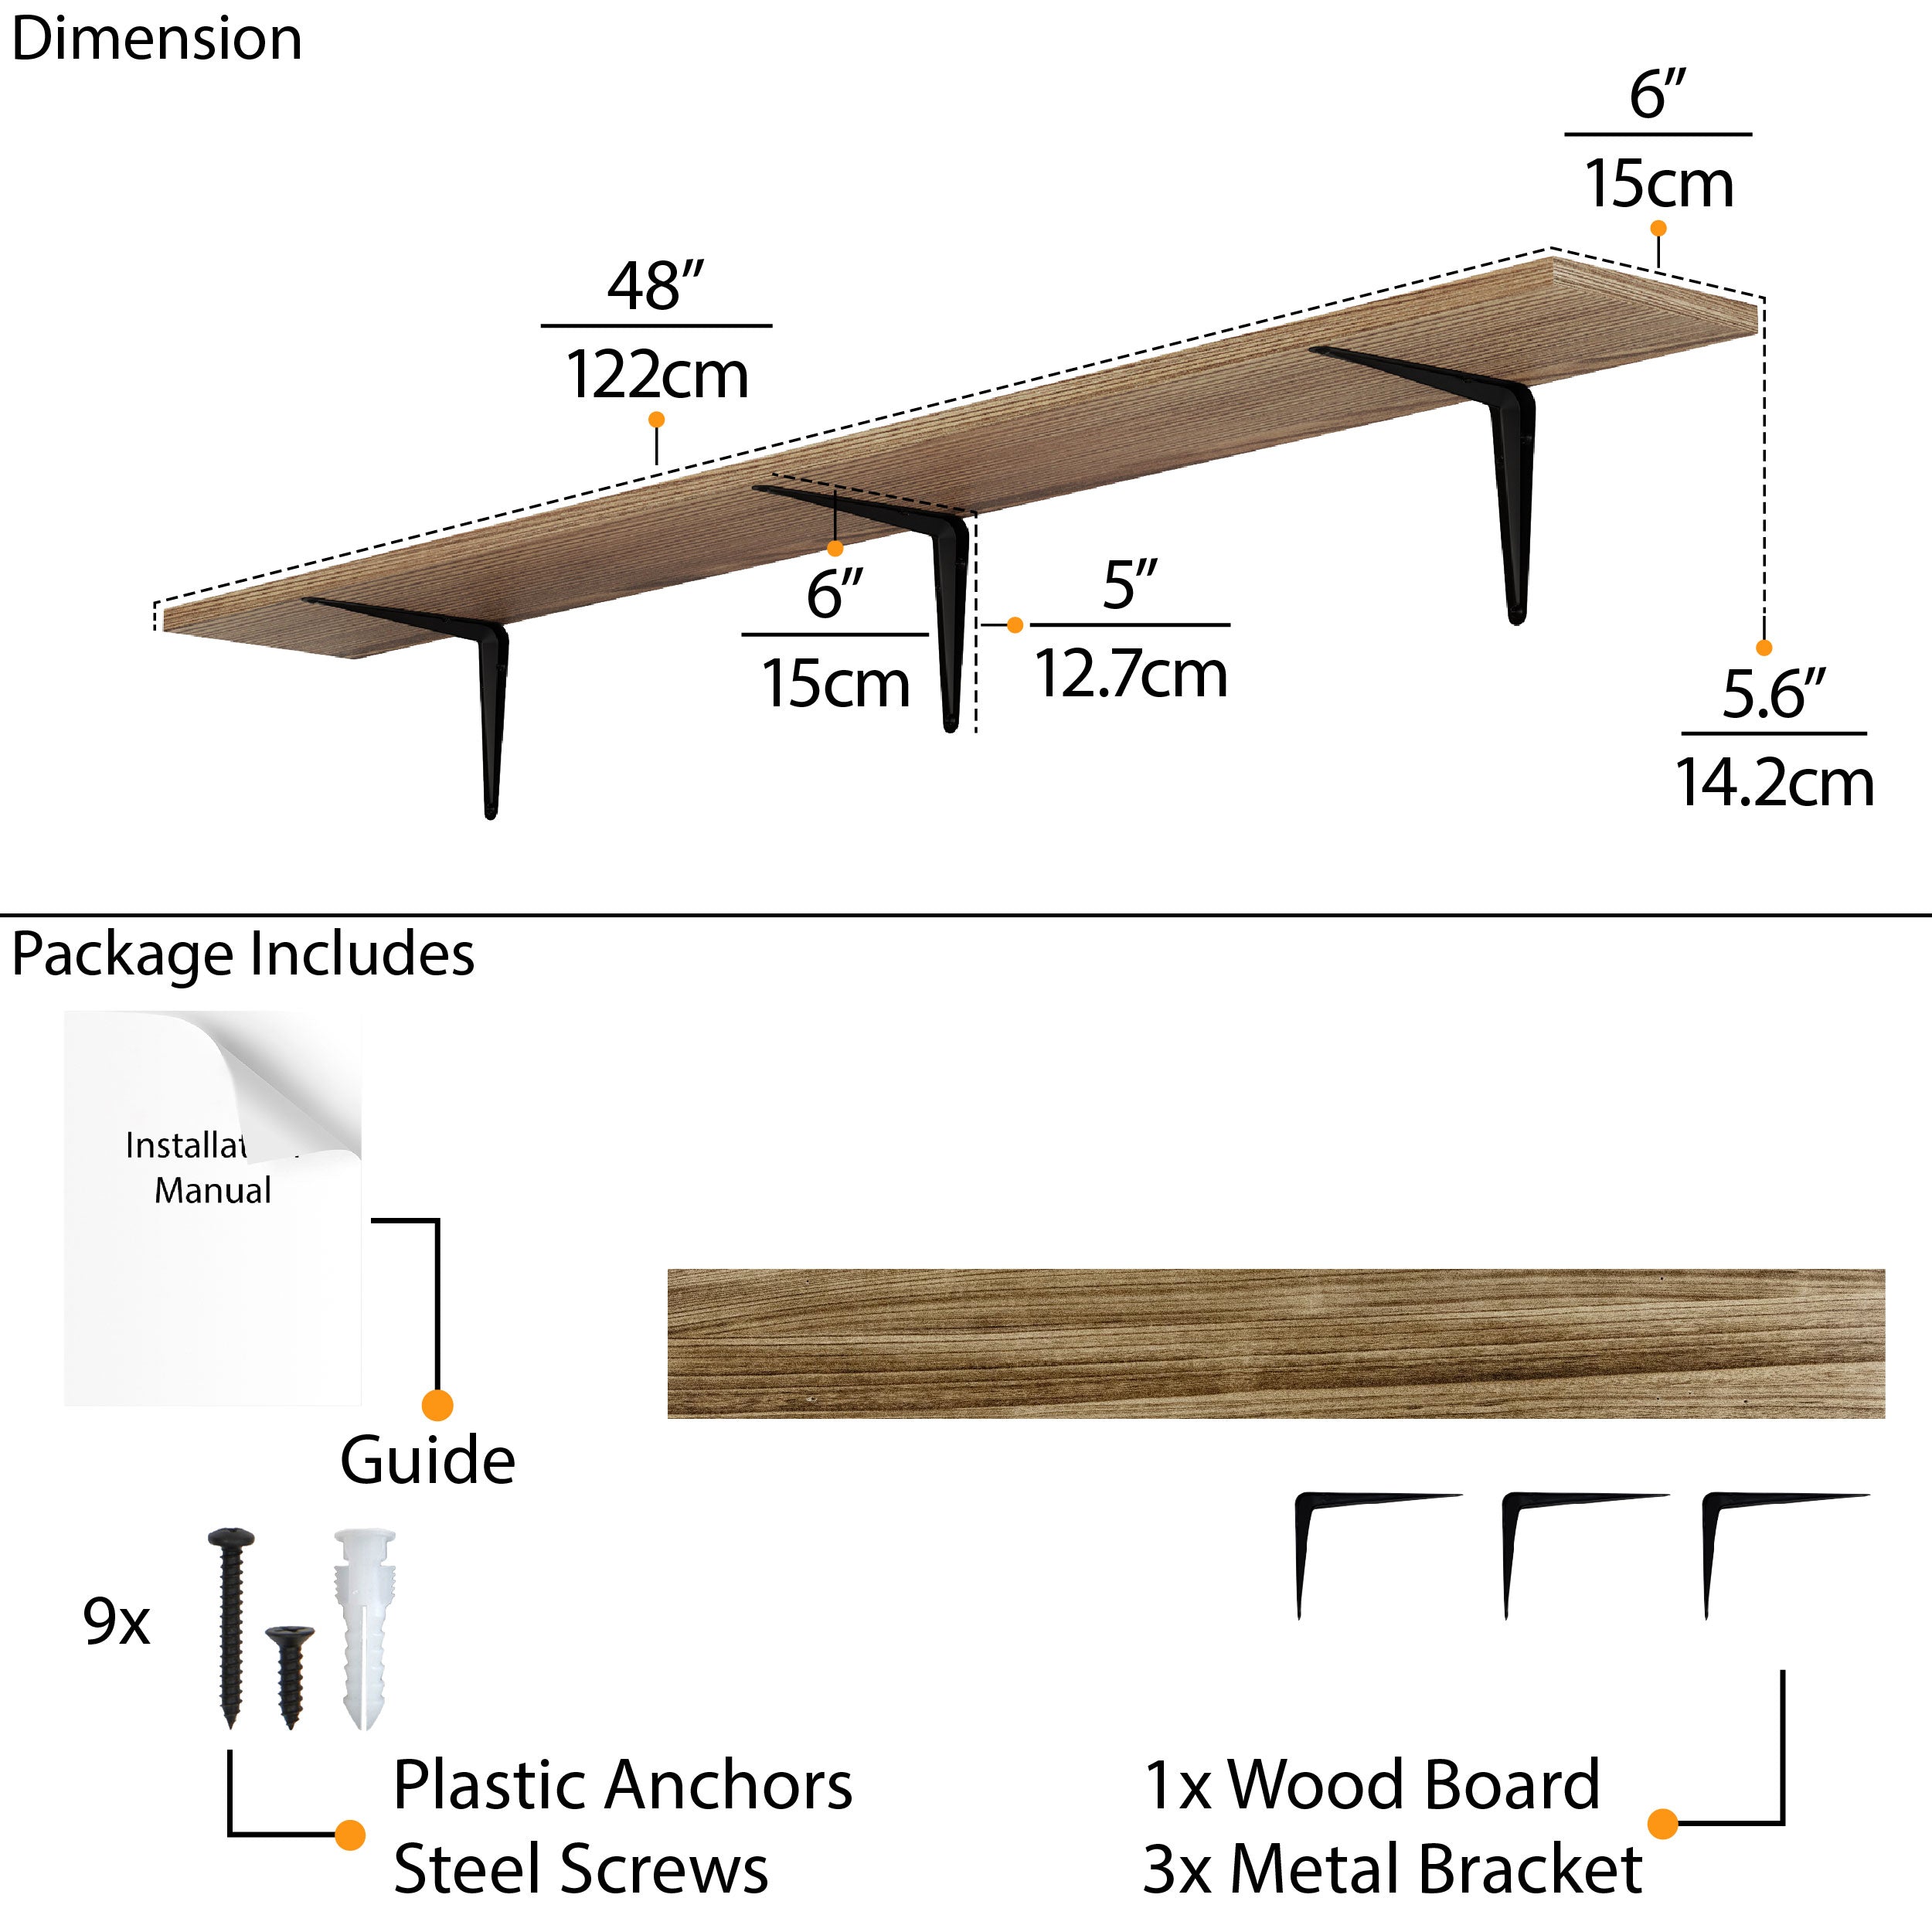 Detailed display of a 60'' rustic shelf's dimensions and included mounting hardware, useful for installation.